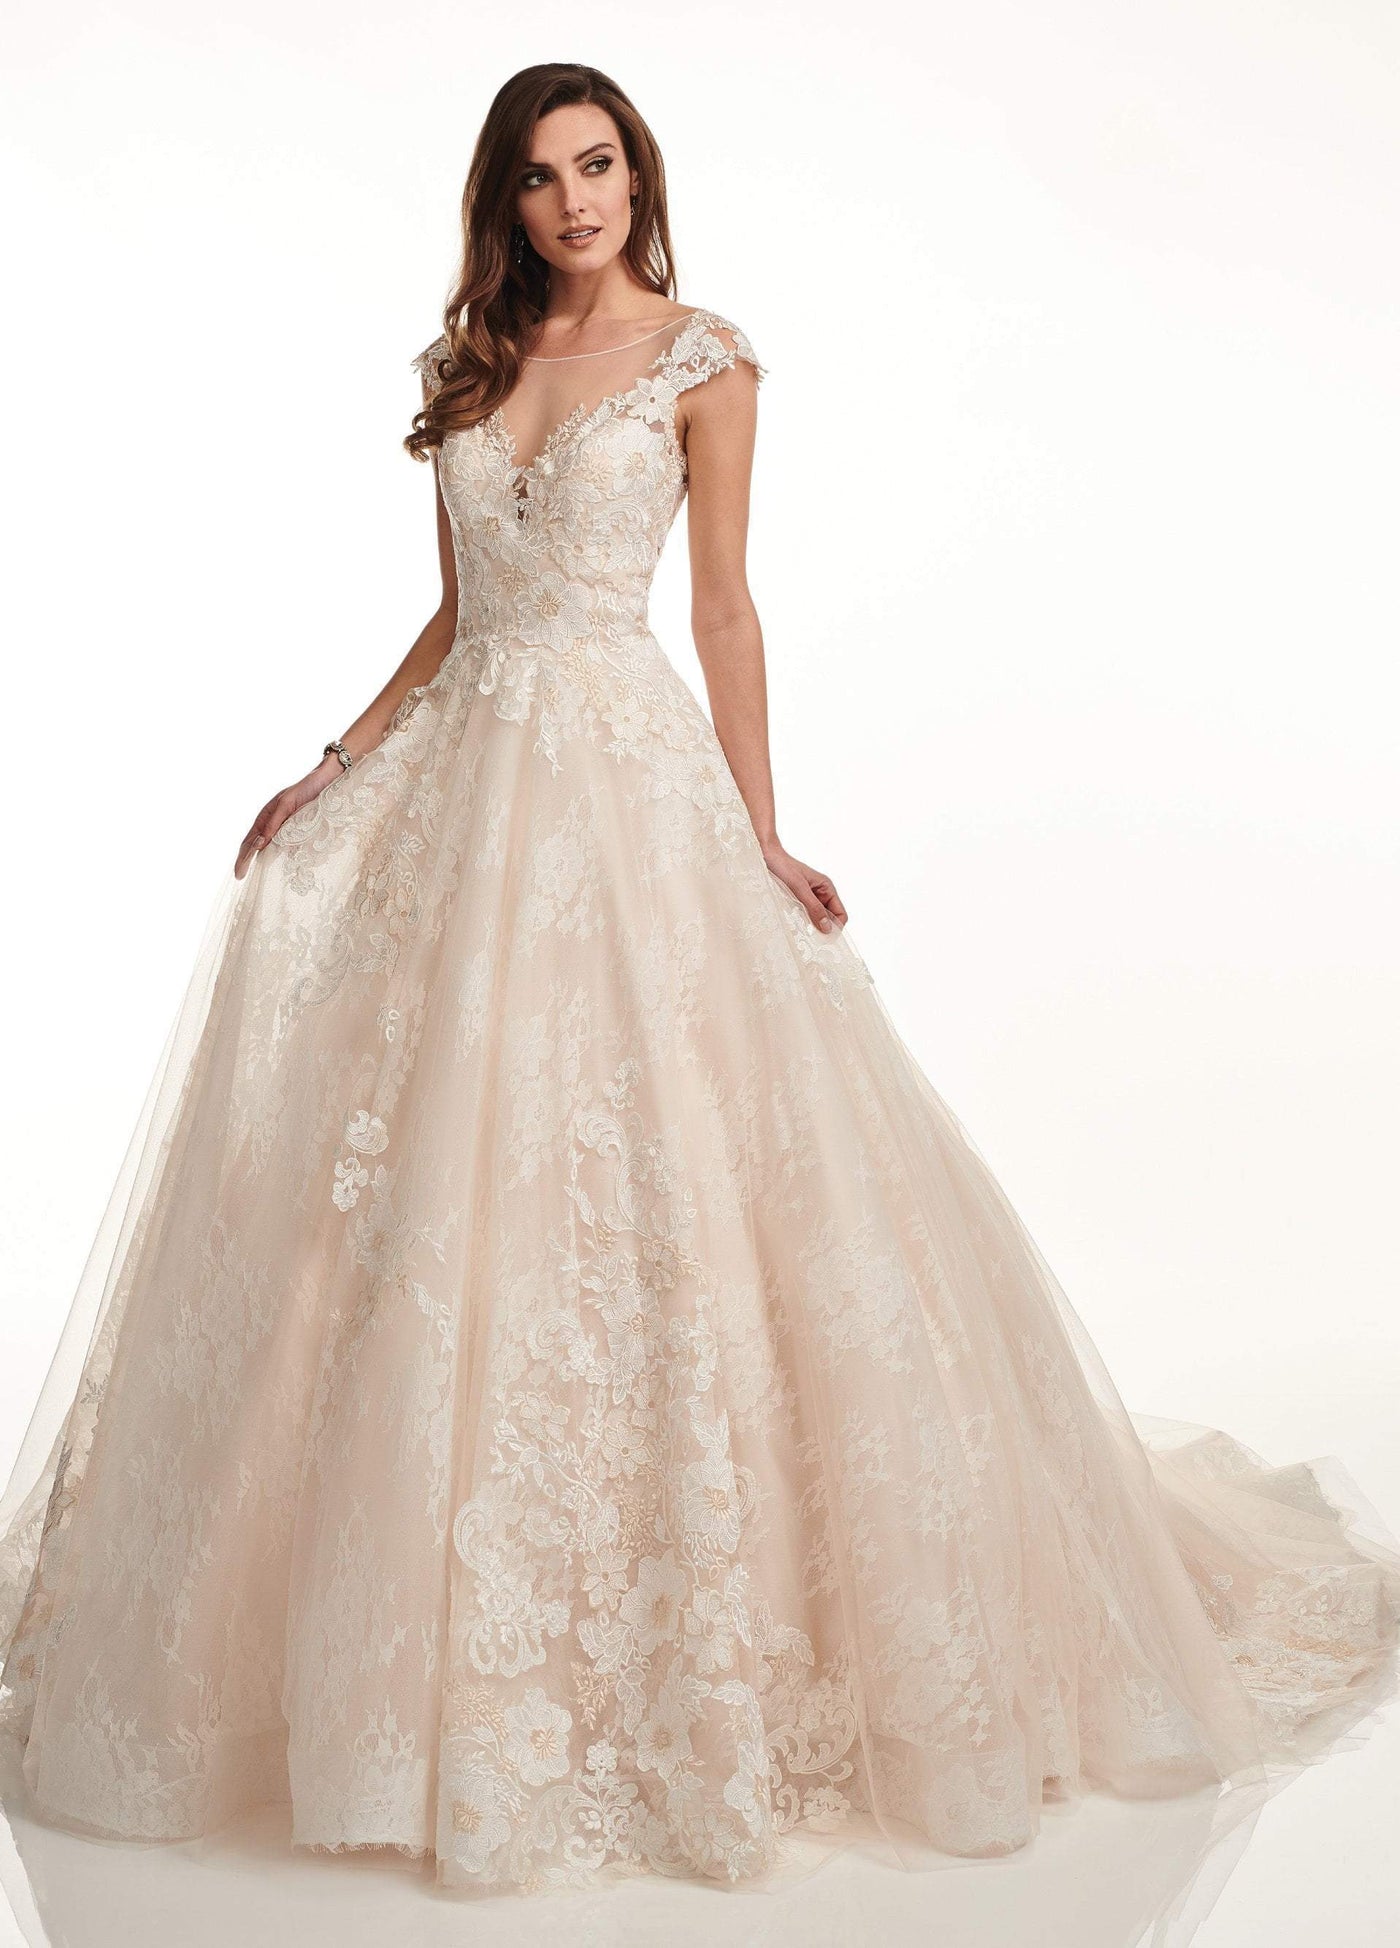 Lo'Adoro by Rachel Allan - M728 Floral Lace Accent Tulle Bridal Dress Special Occasion Dress 0 / Ivory Champagne